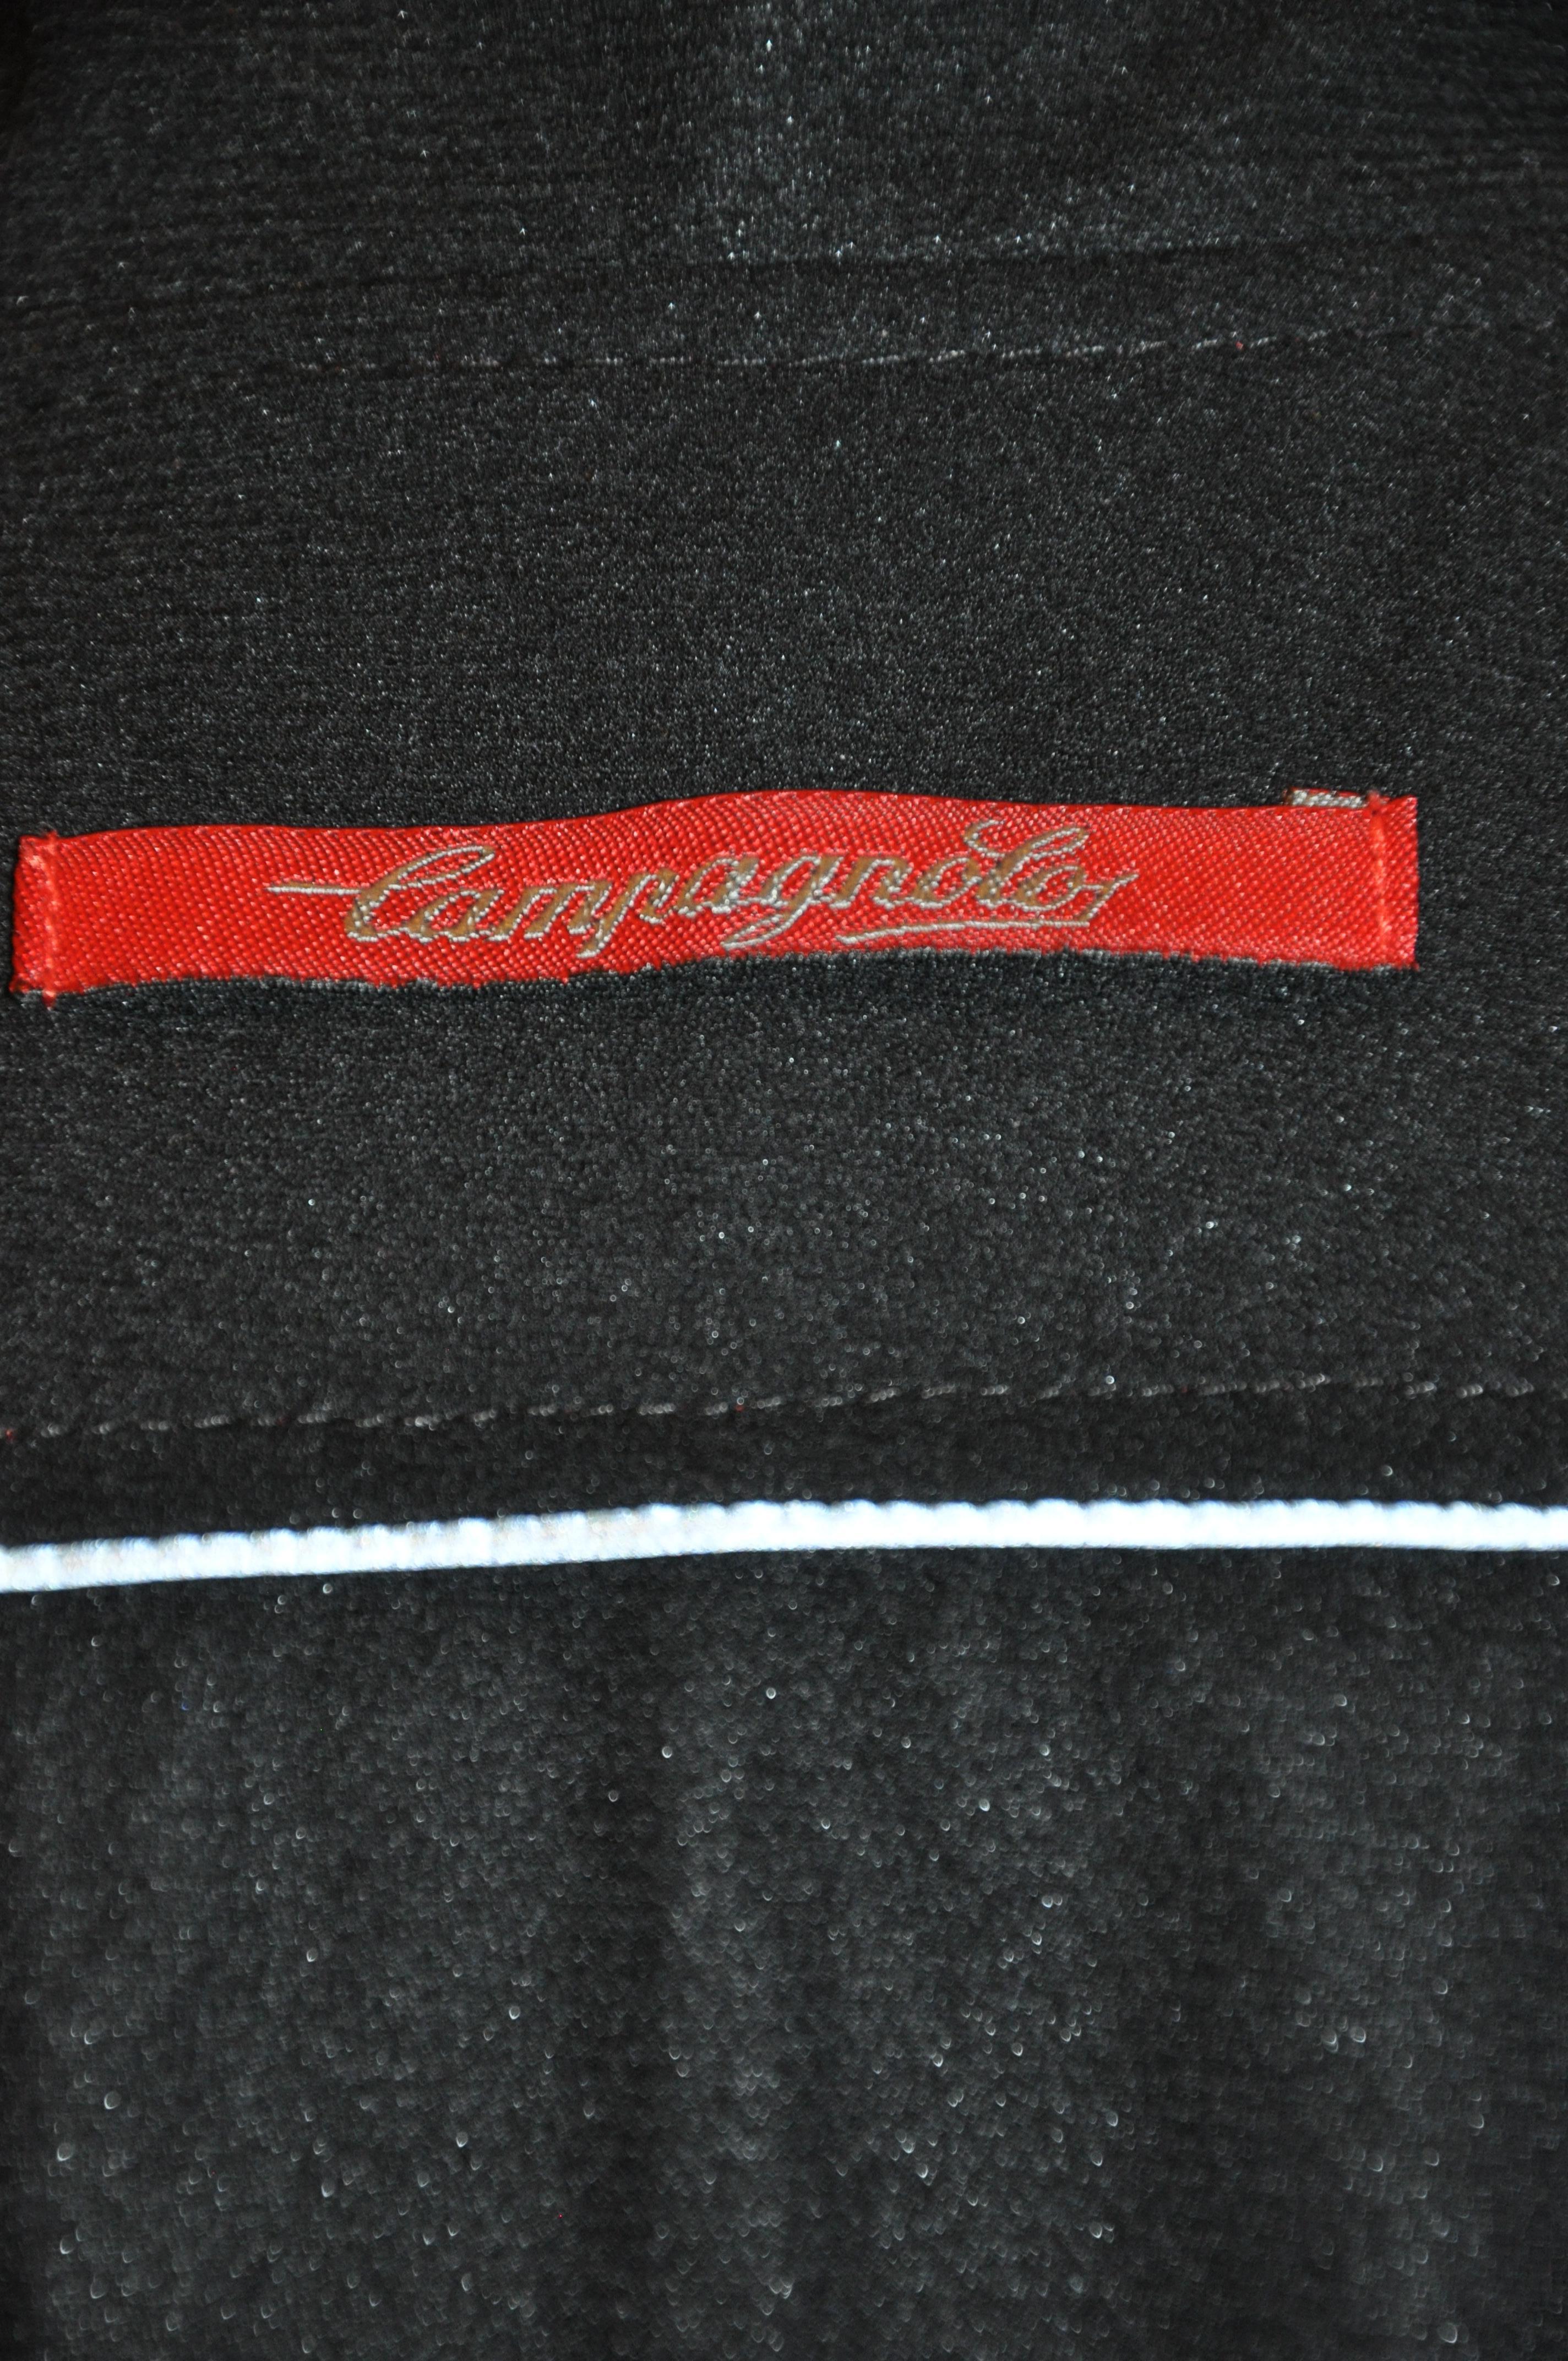 Campagnolo of Italy Tour du France Touring Bike Zipper Jacket 2